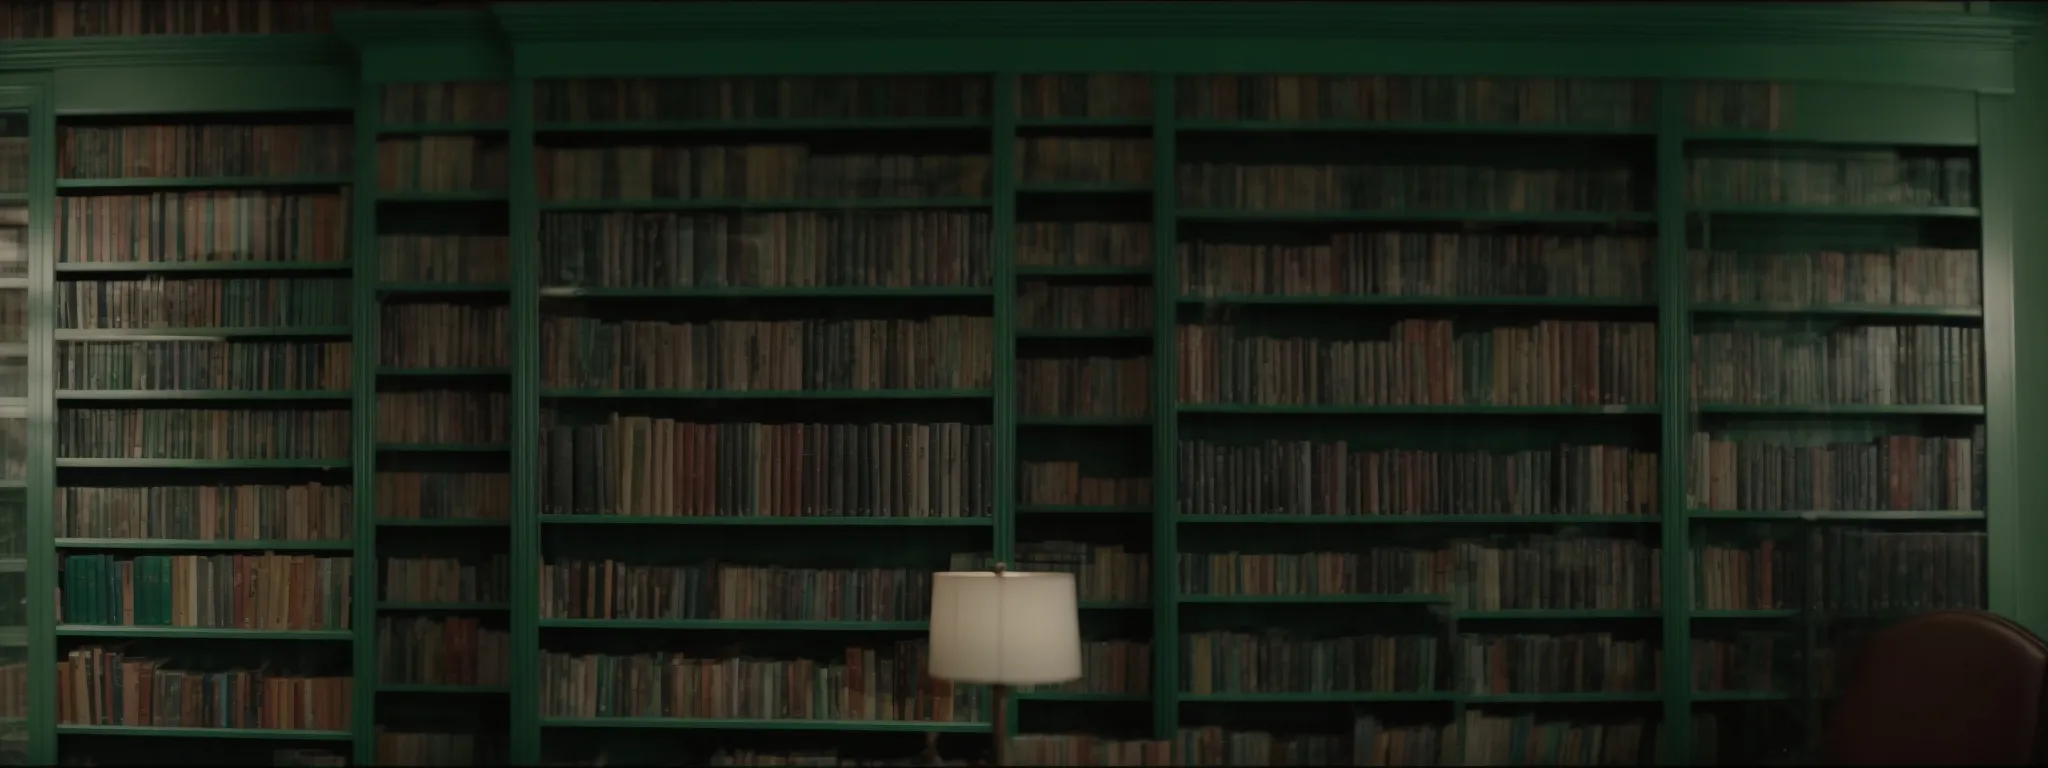 a green library with color-coded, labeled shelves indicating different topics and categories.